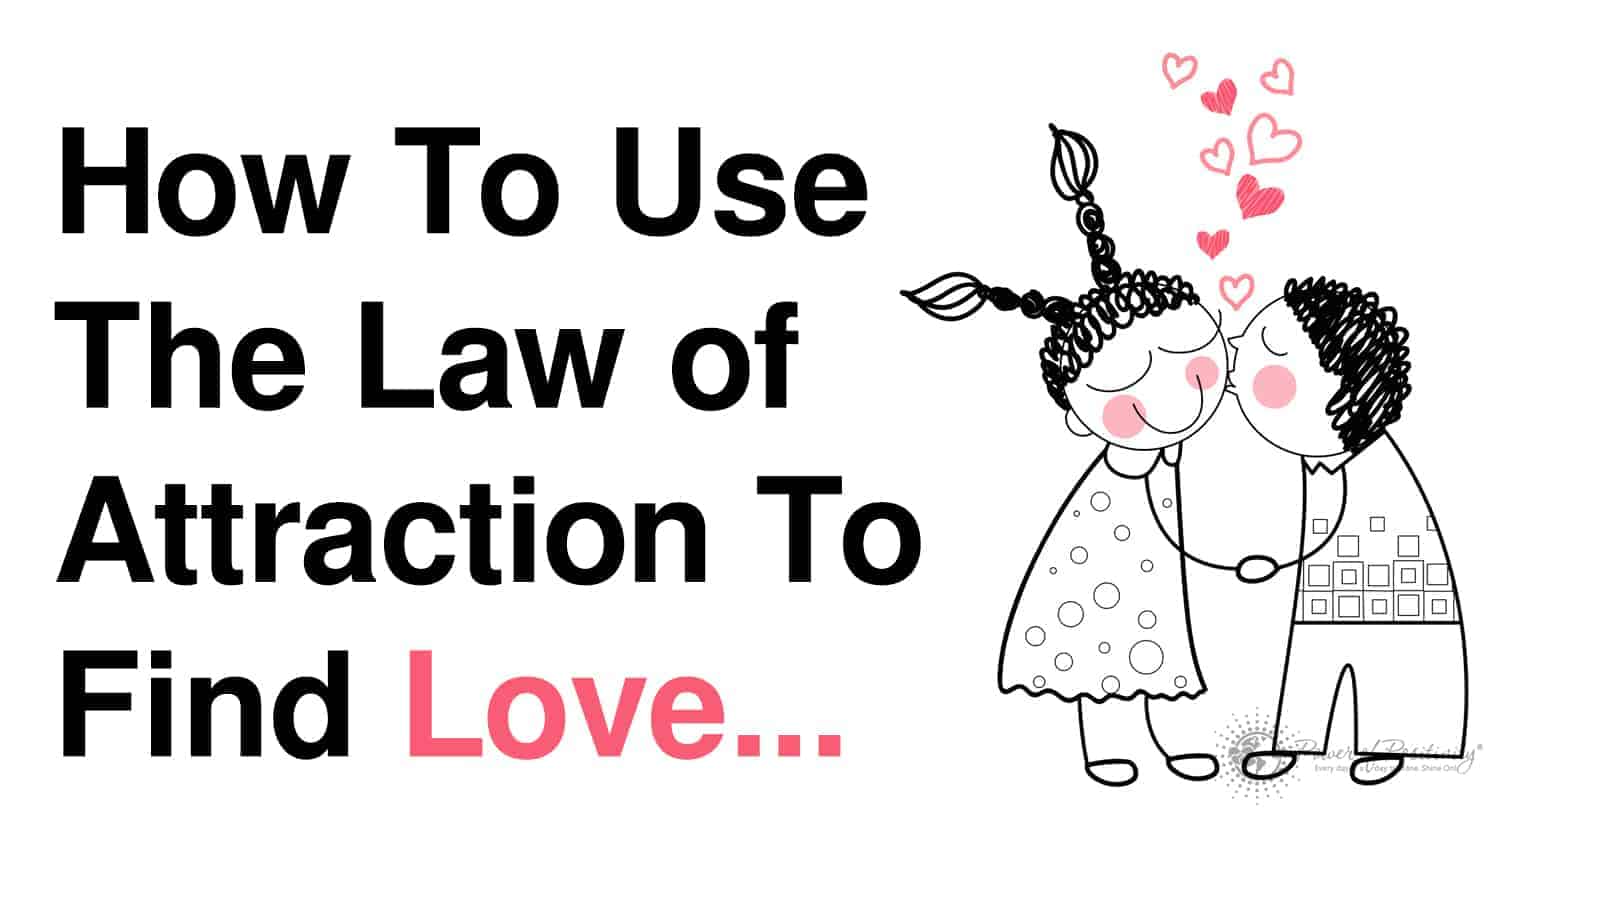 How to use law of attraction to find love